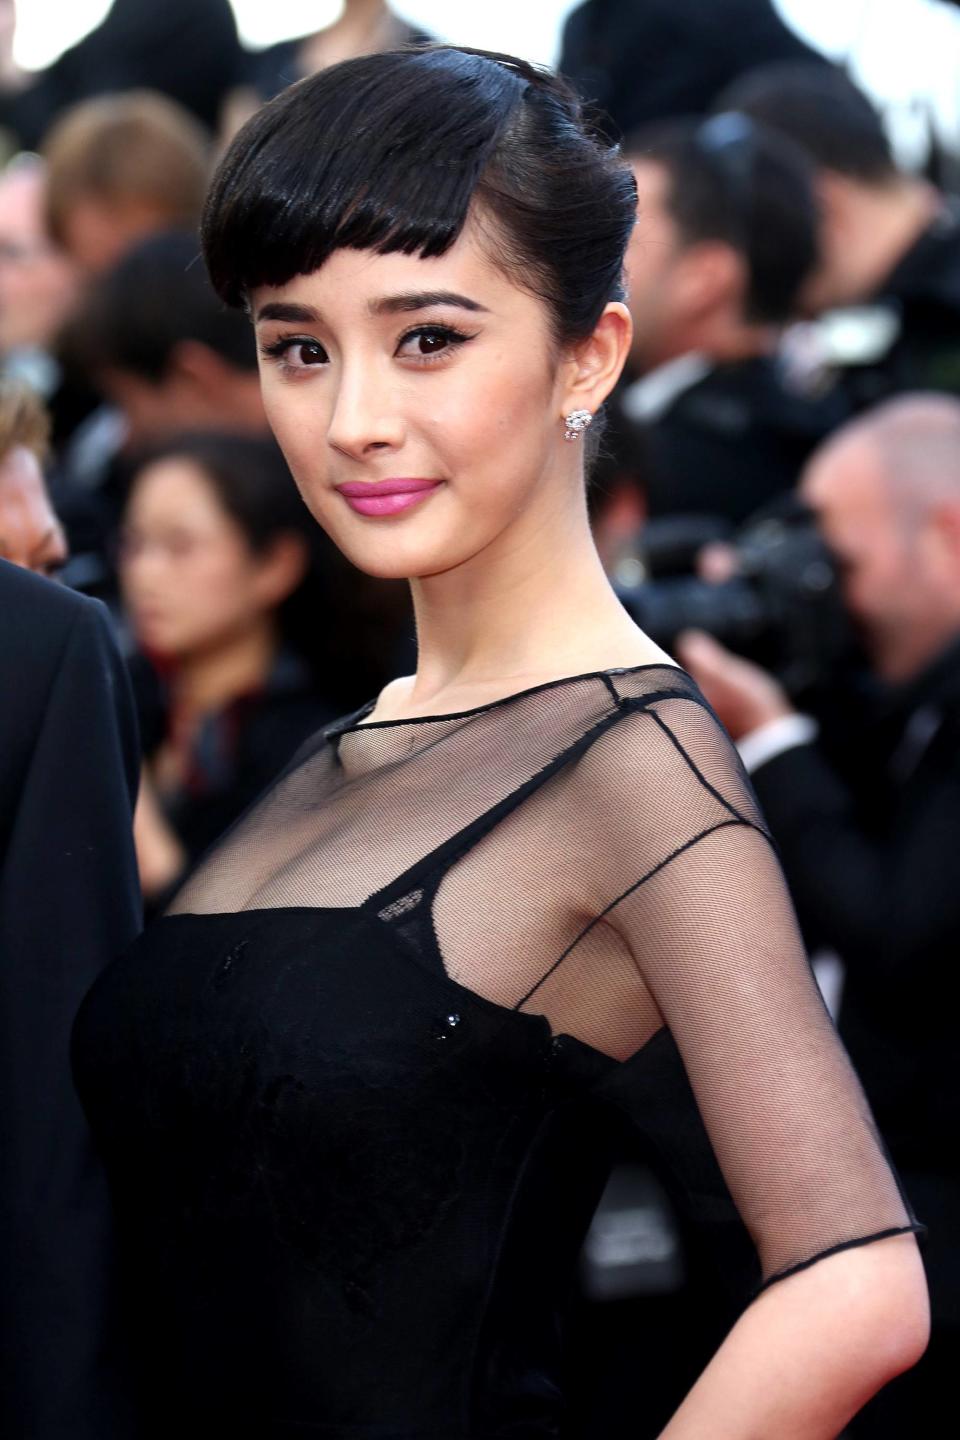 Yang Mi
'Madagascar 3: Europe's Most Wanted' premiere- during the 65th Cannes Film Festival
Cannes, France - 18.05.12
Credit: Ian Wilson/WENN.com